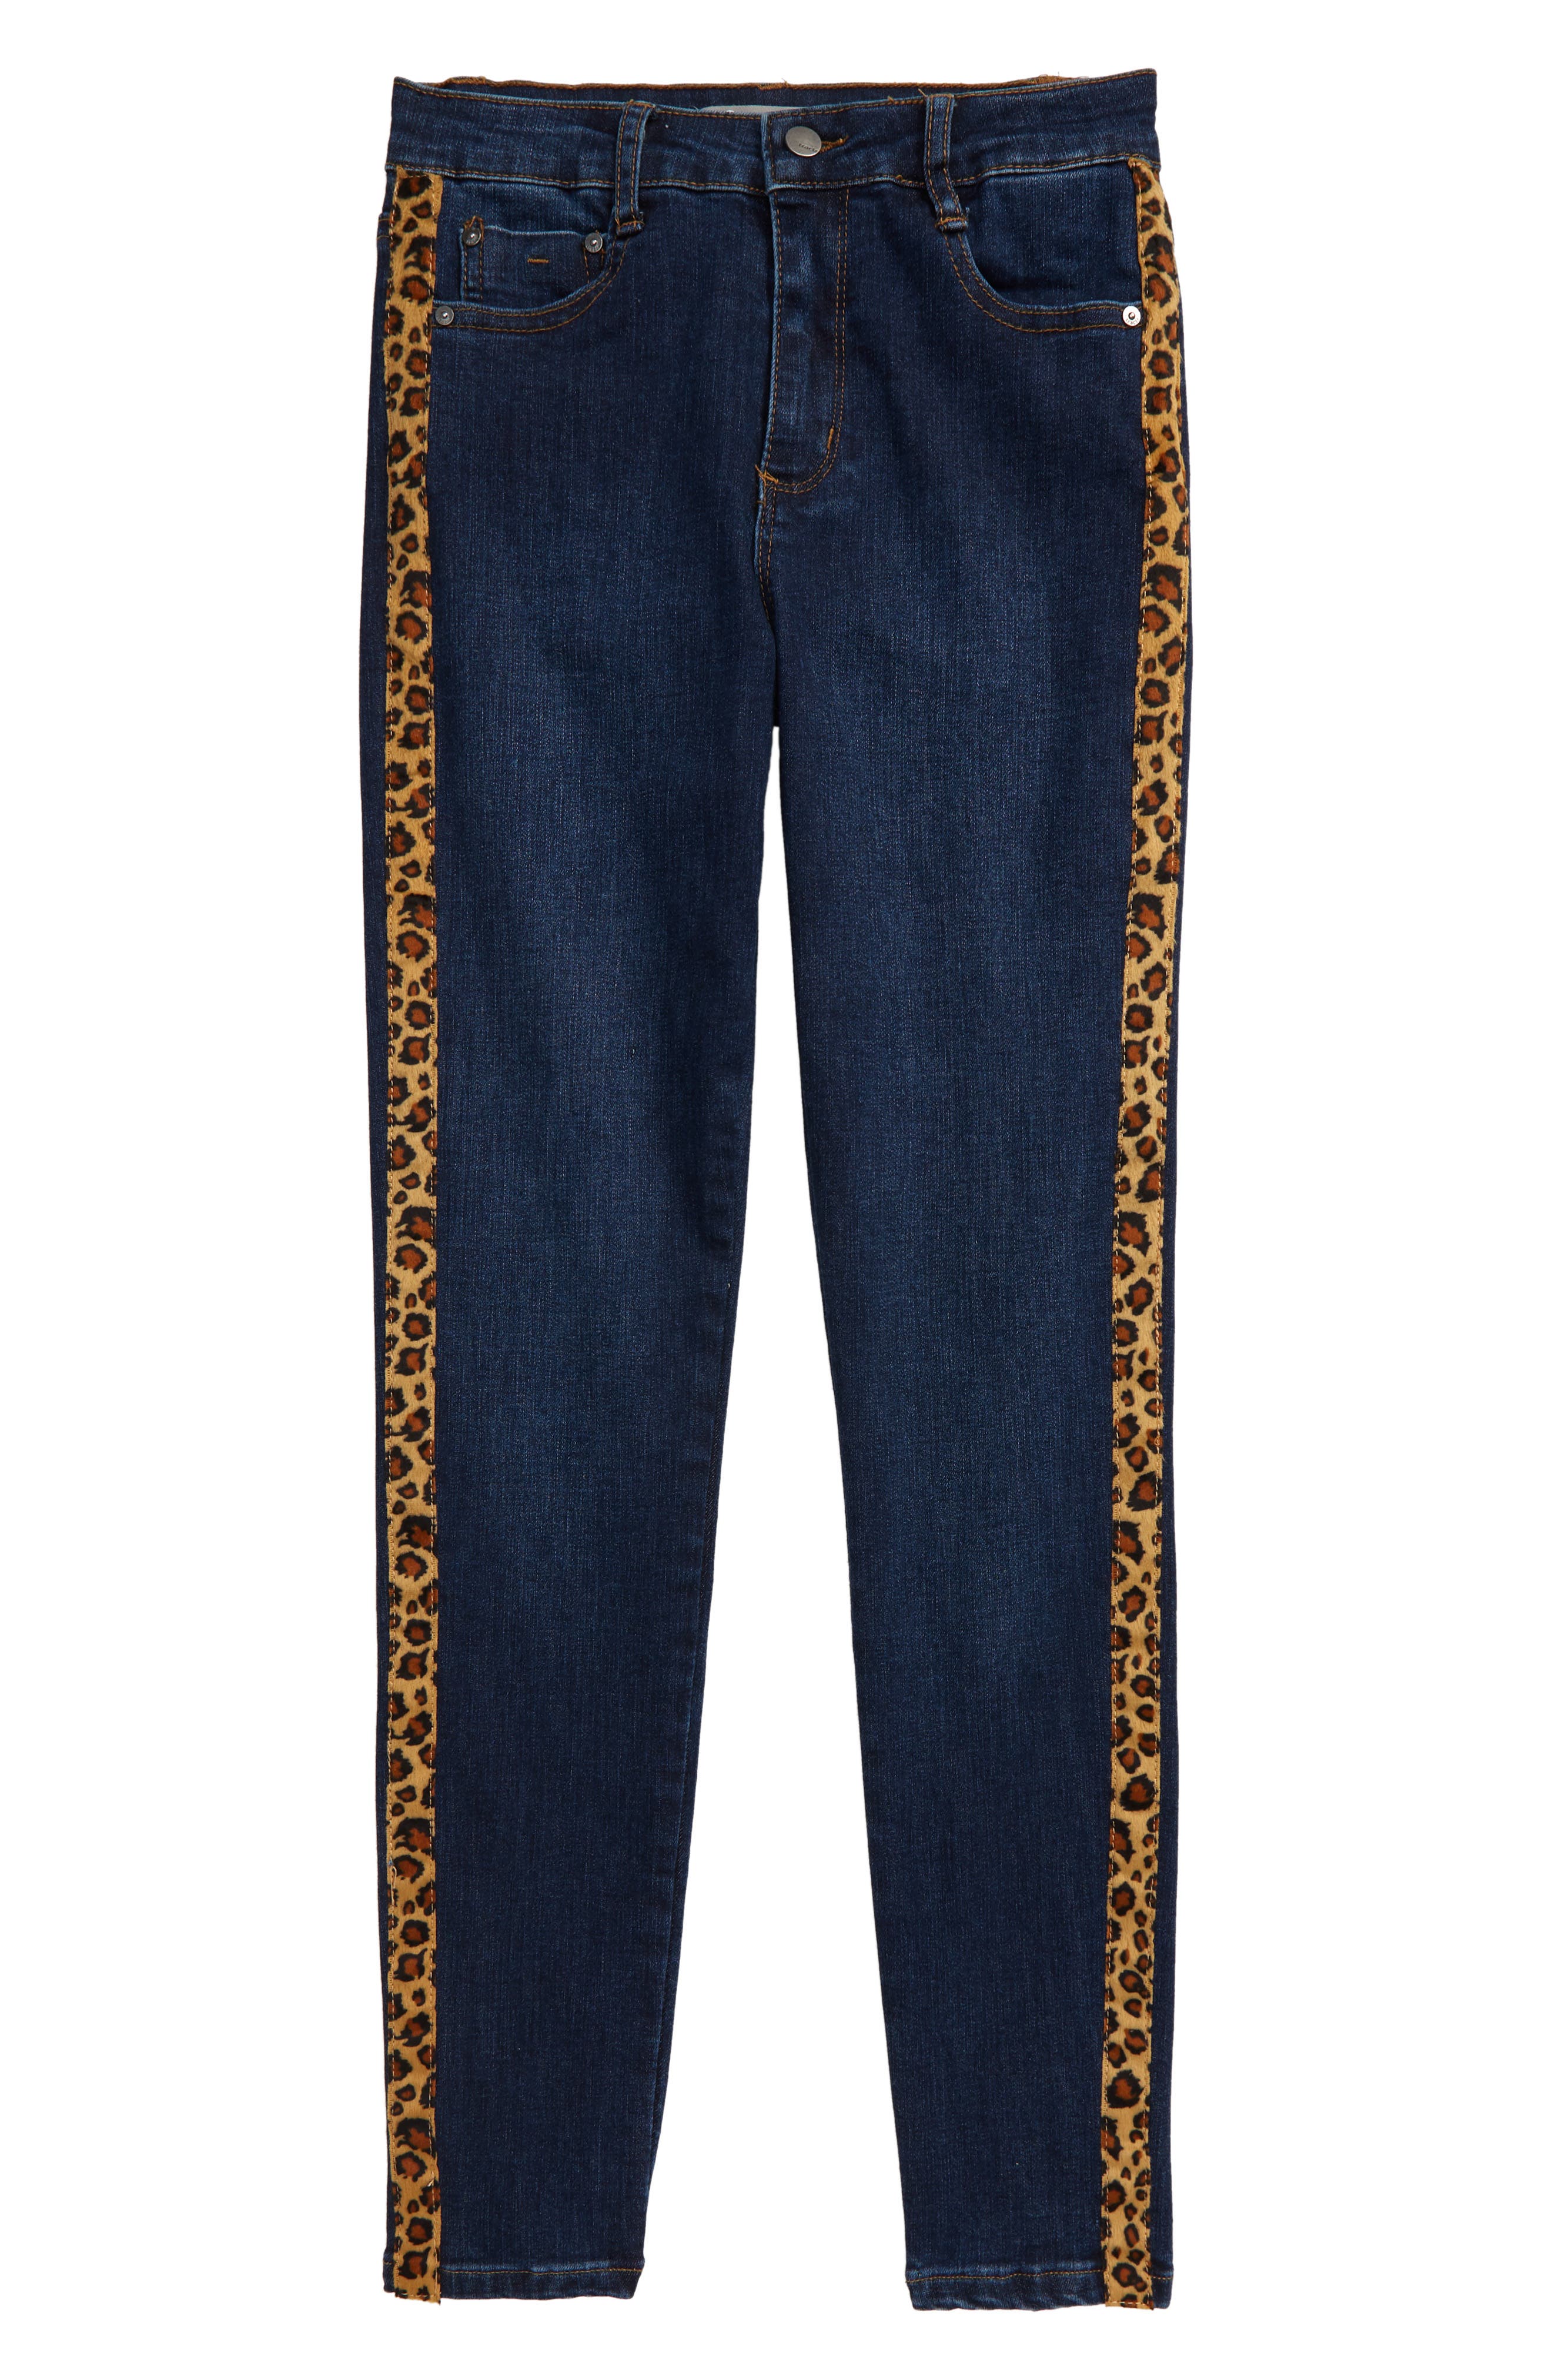 tractr high waist skinny jeans